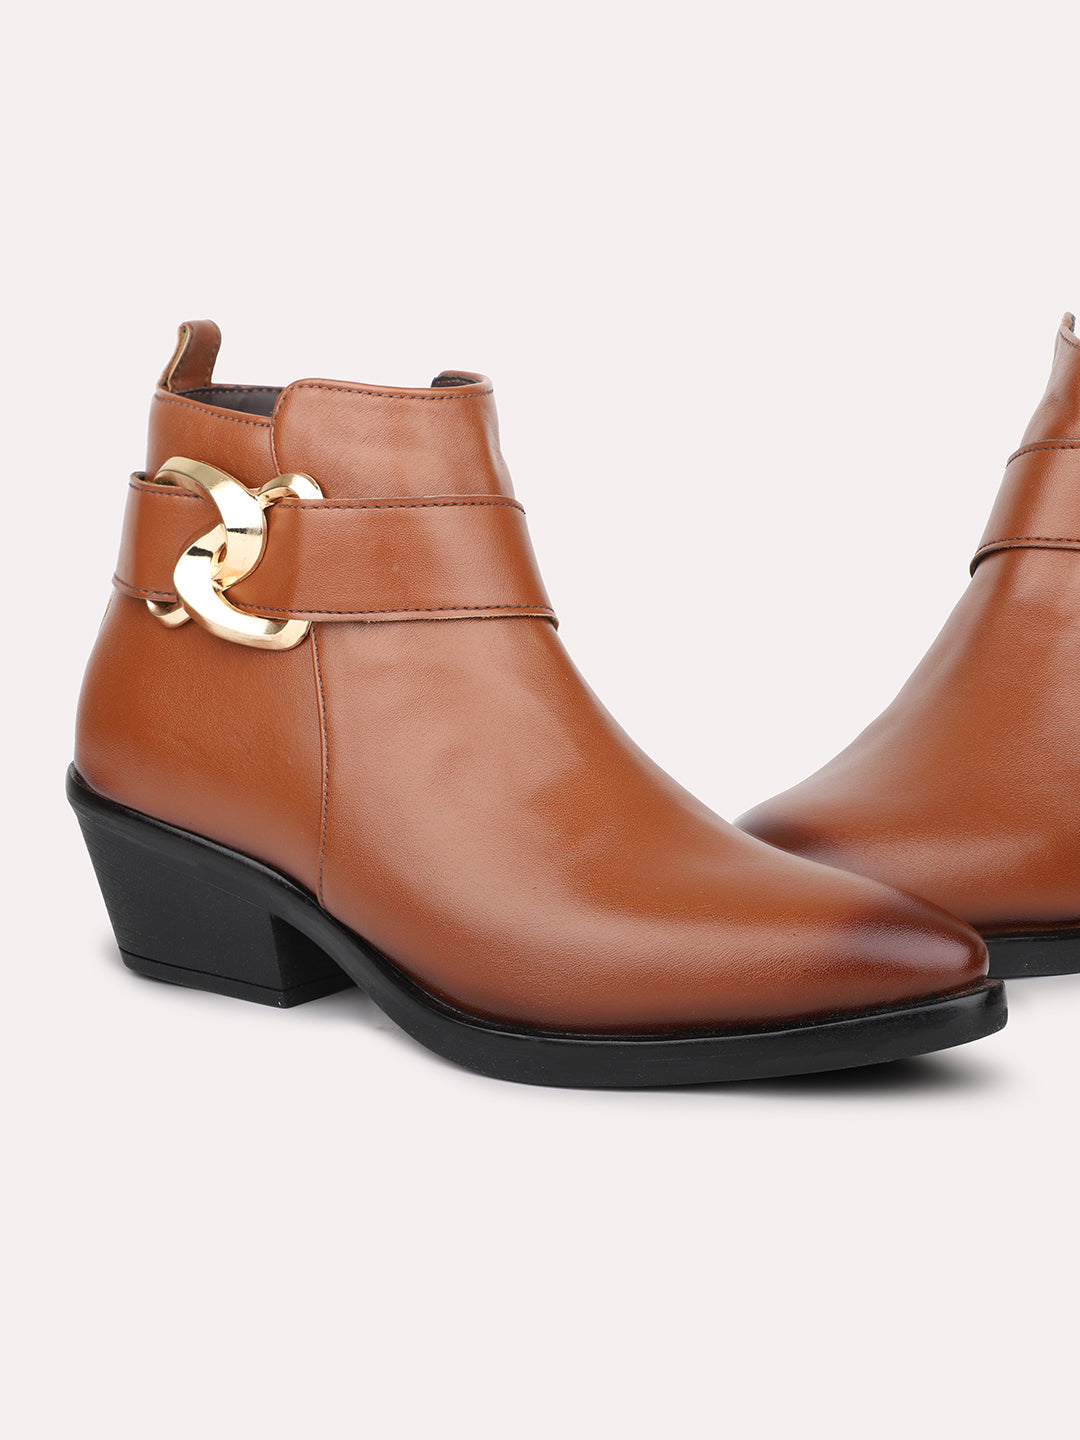 Women Tan Mid Top Block Heel Chunky Boots With Buckle Detail